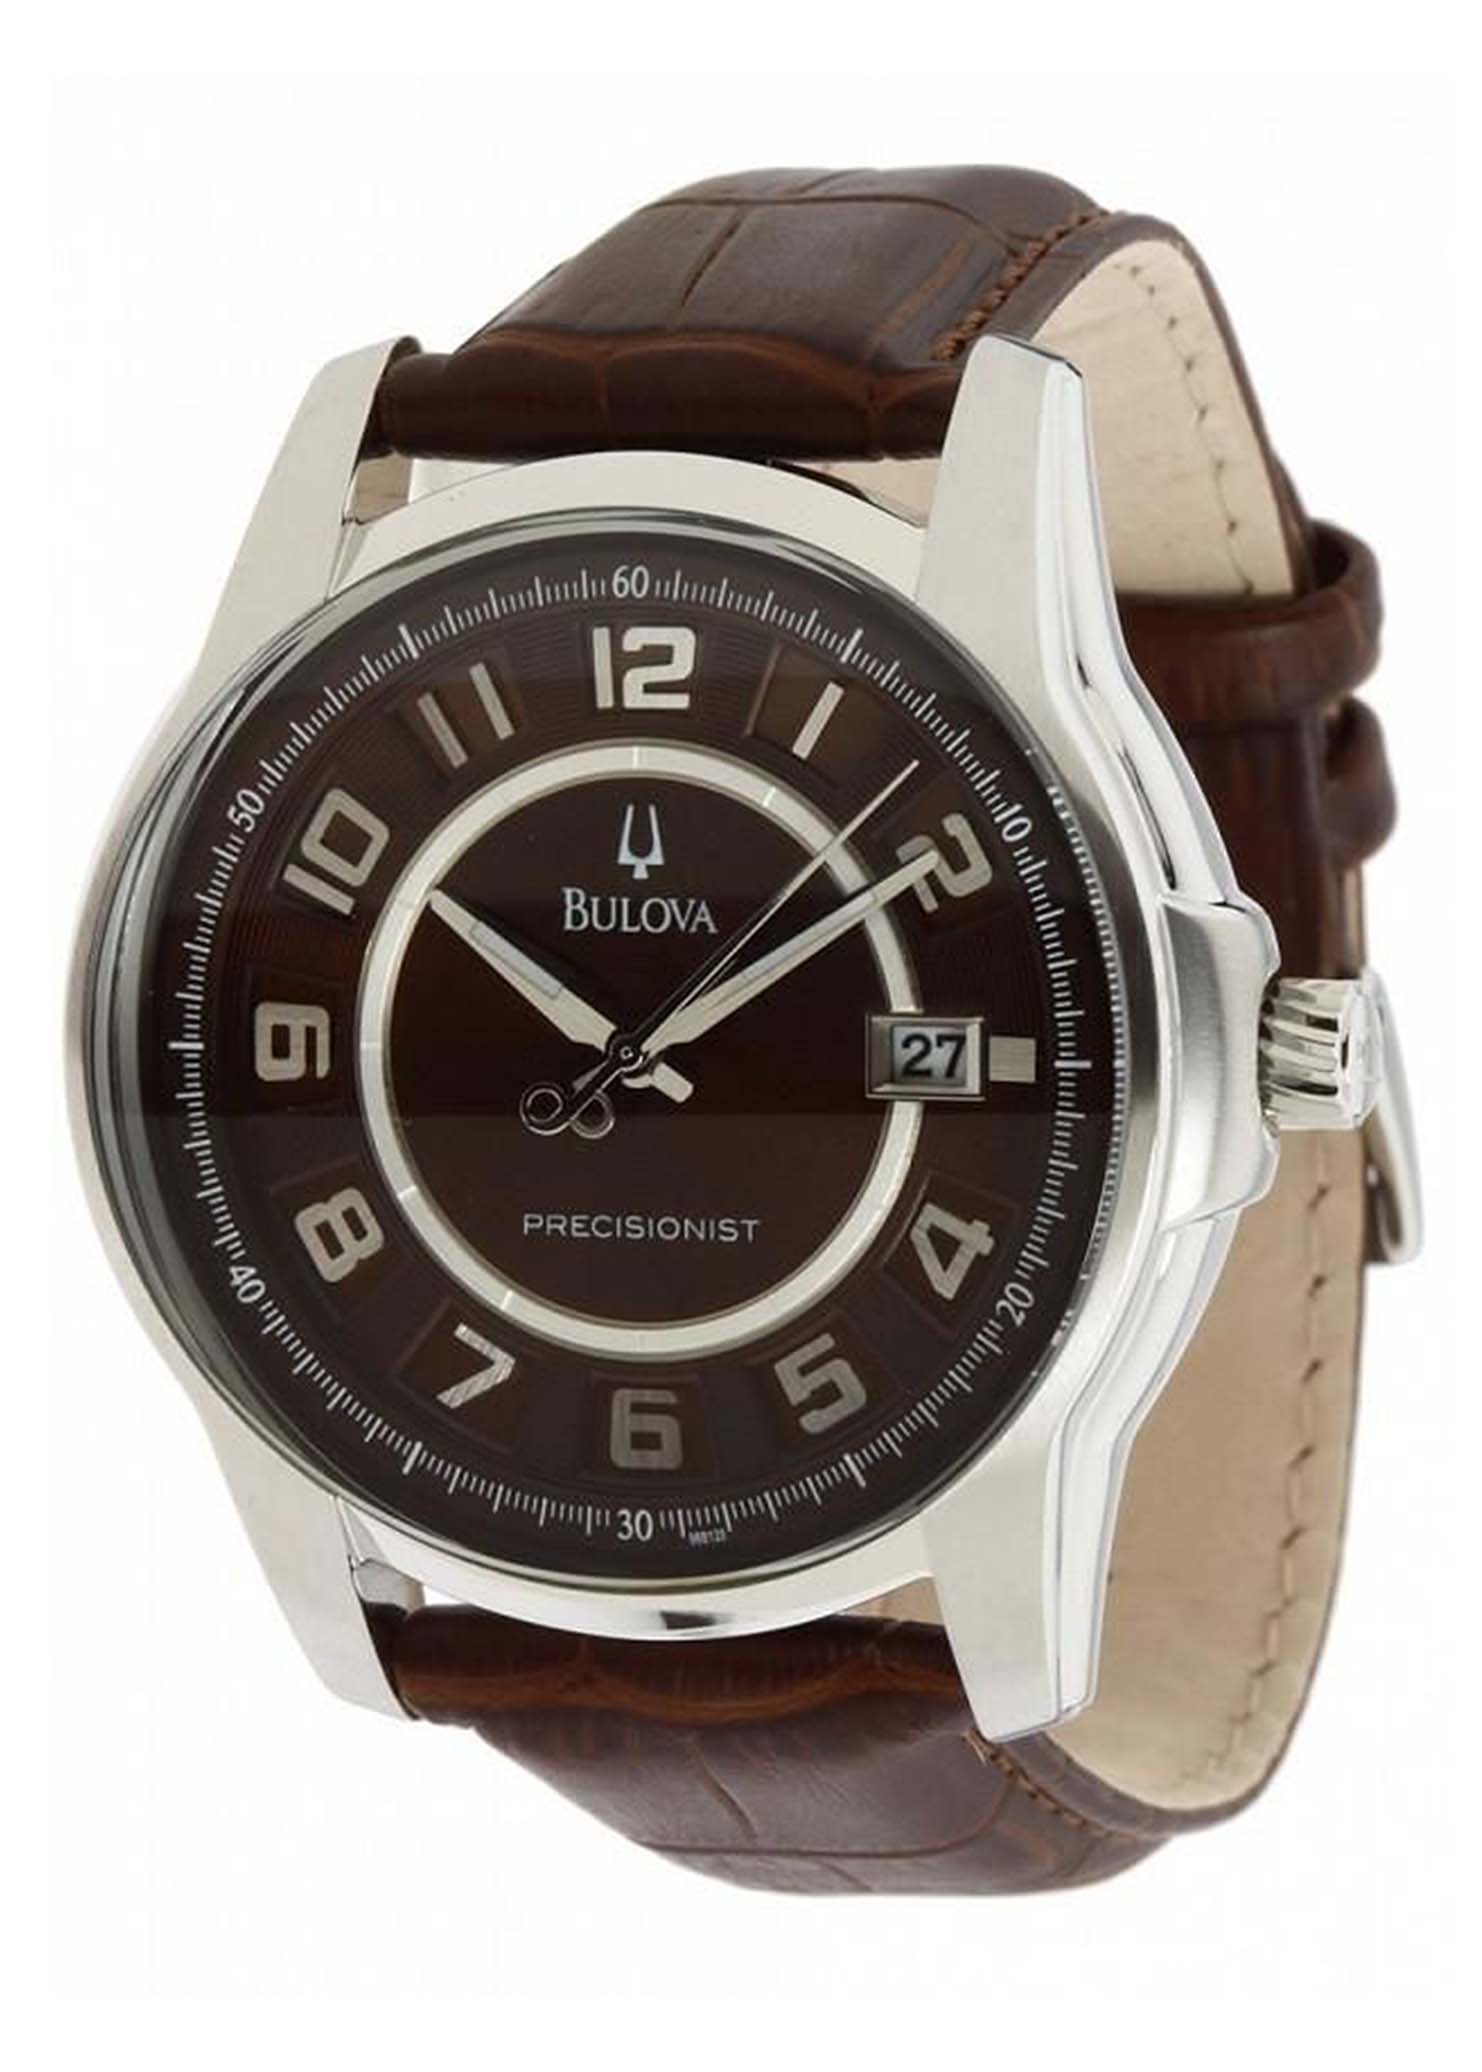 Precisionist Brown Dial Men's Watch 96B128 Image